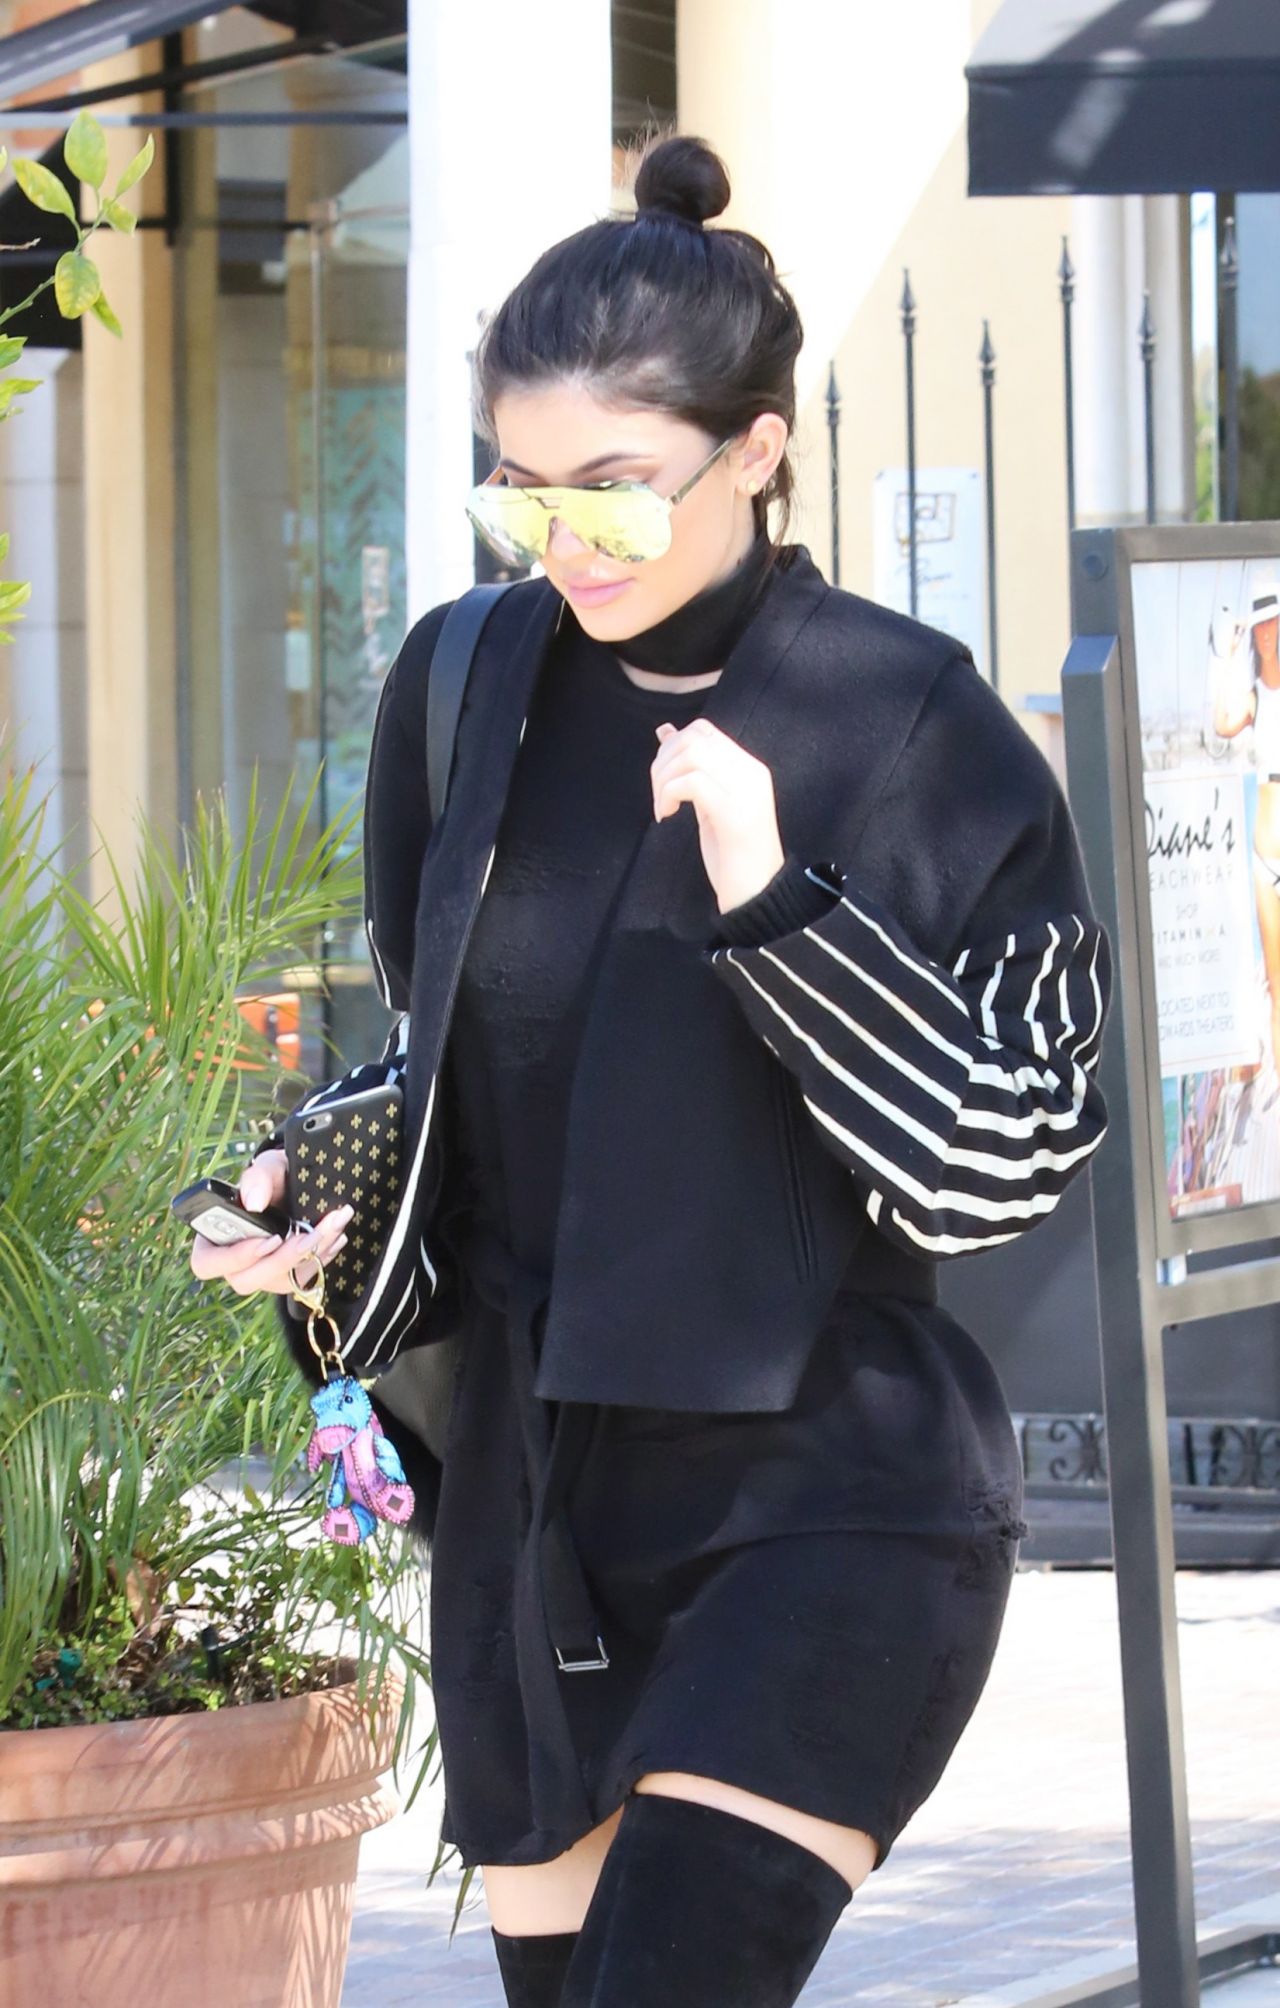 Kylie Jenner Urban Outfit - Out for Lunch in Calabasas 5/18/2016 ...